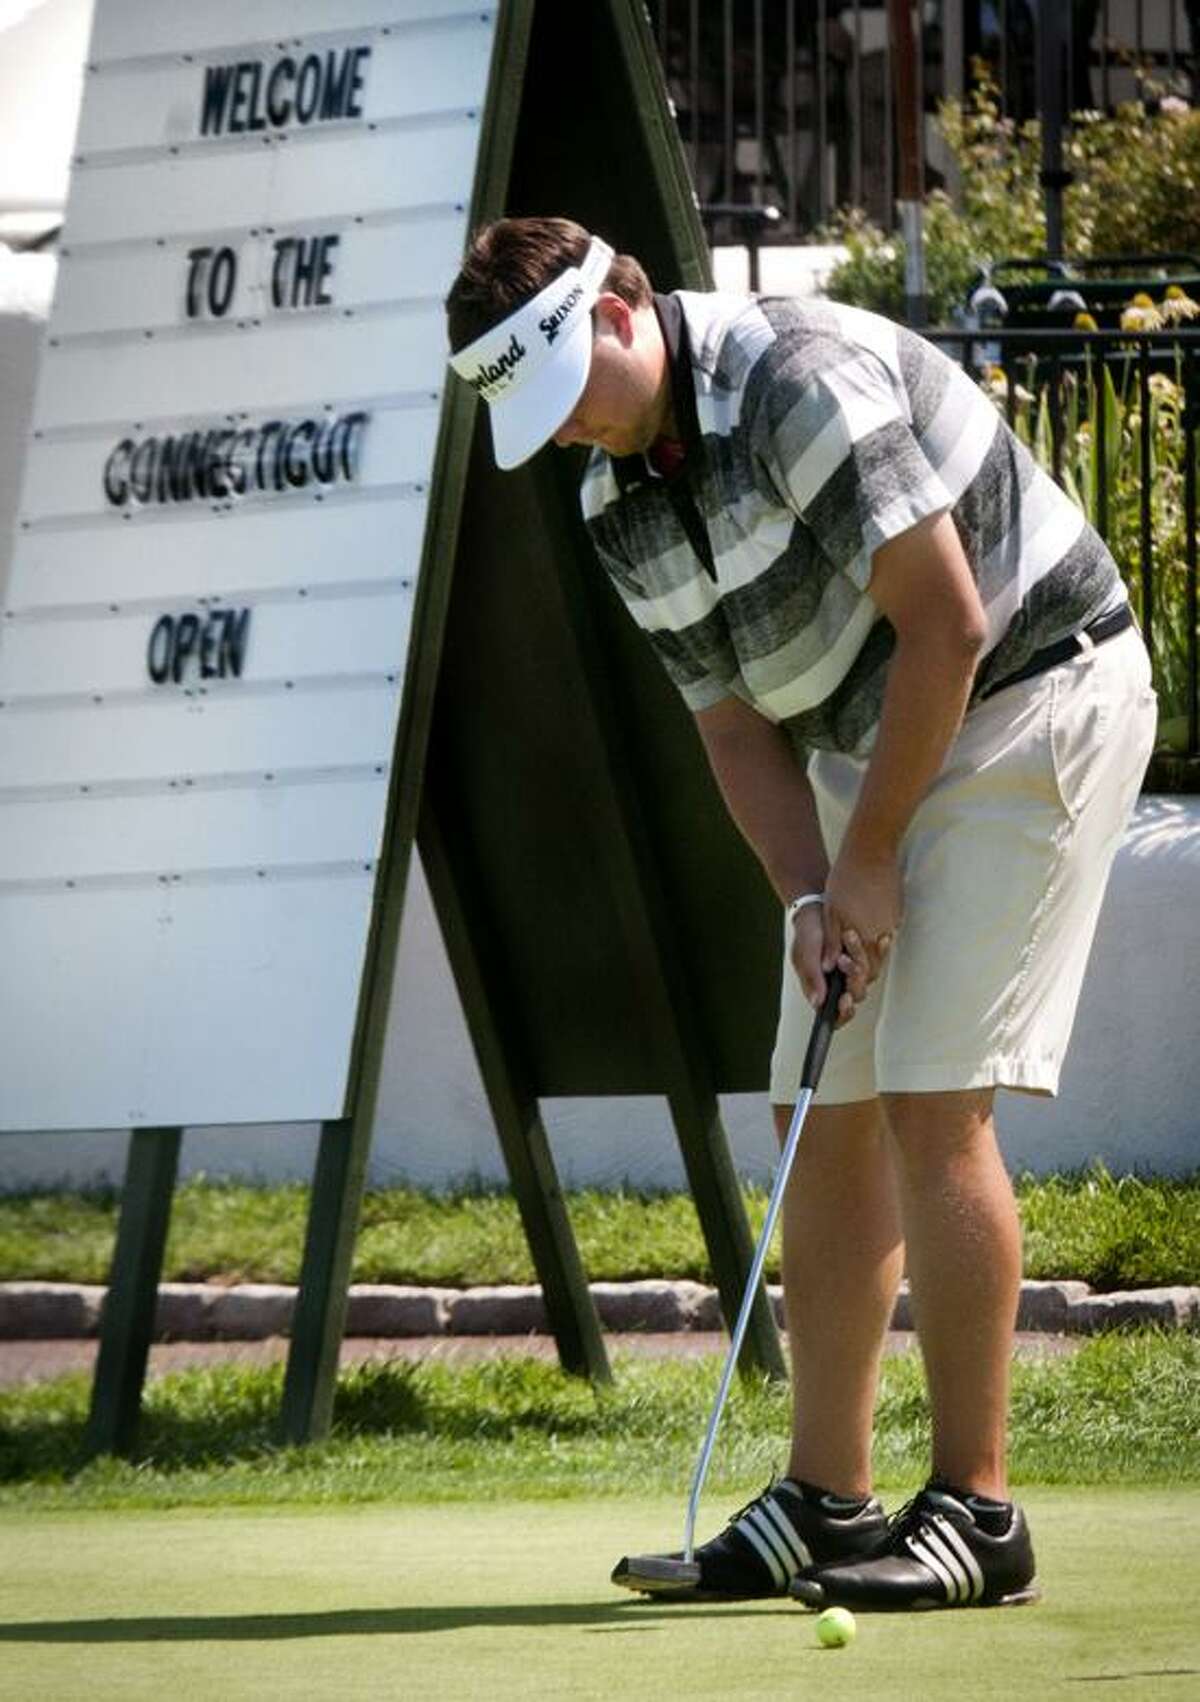 Mike Ballo Jr., of Stamford, practices putting after completing the first round at Connecticut Open. Ballo held a 1-shot lead. Melanie Stengel/Register